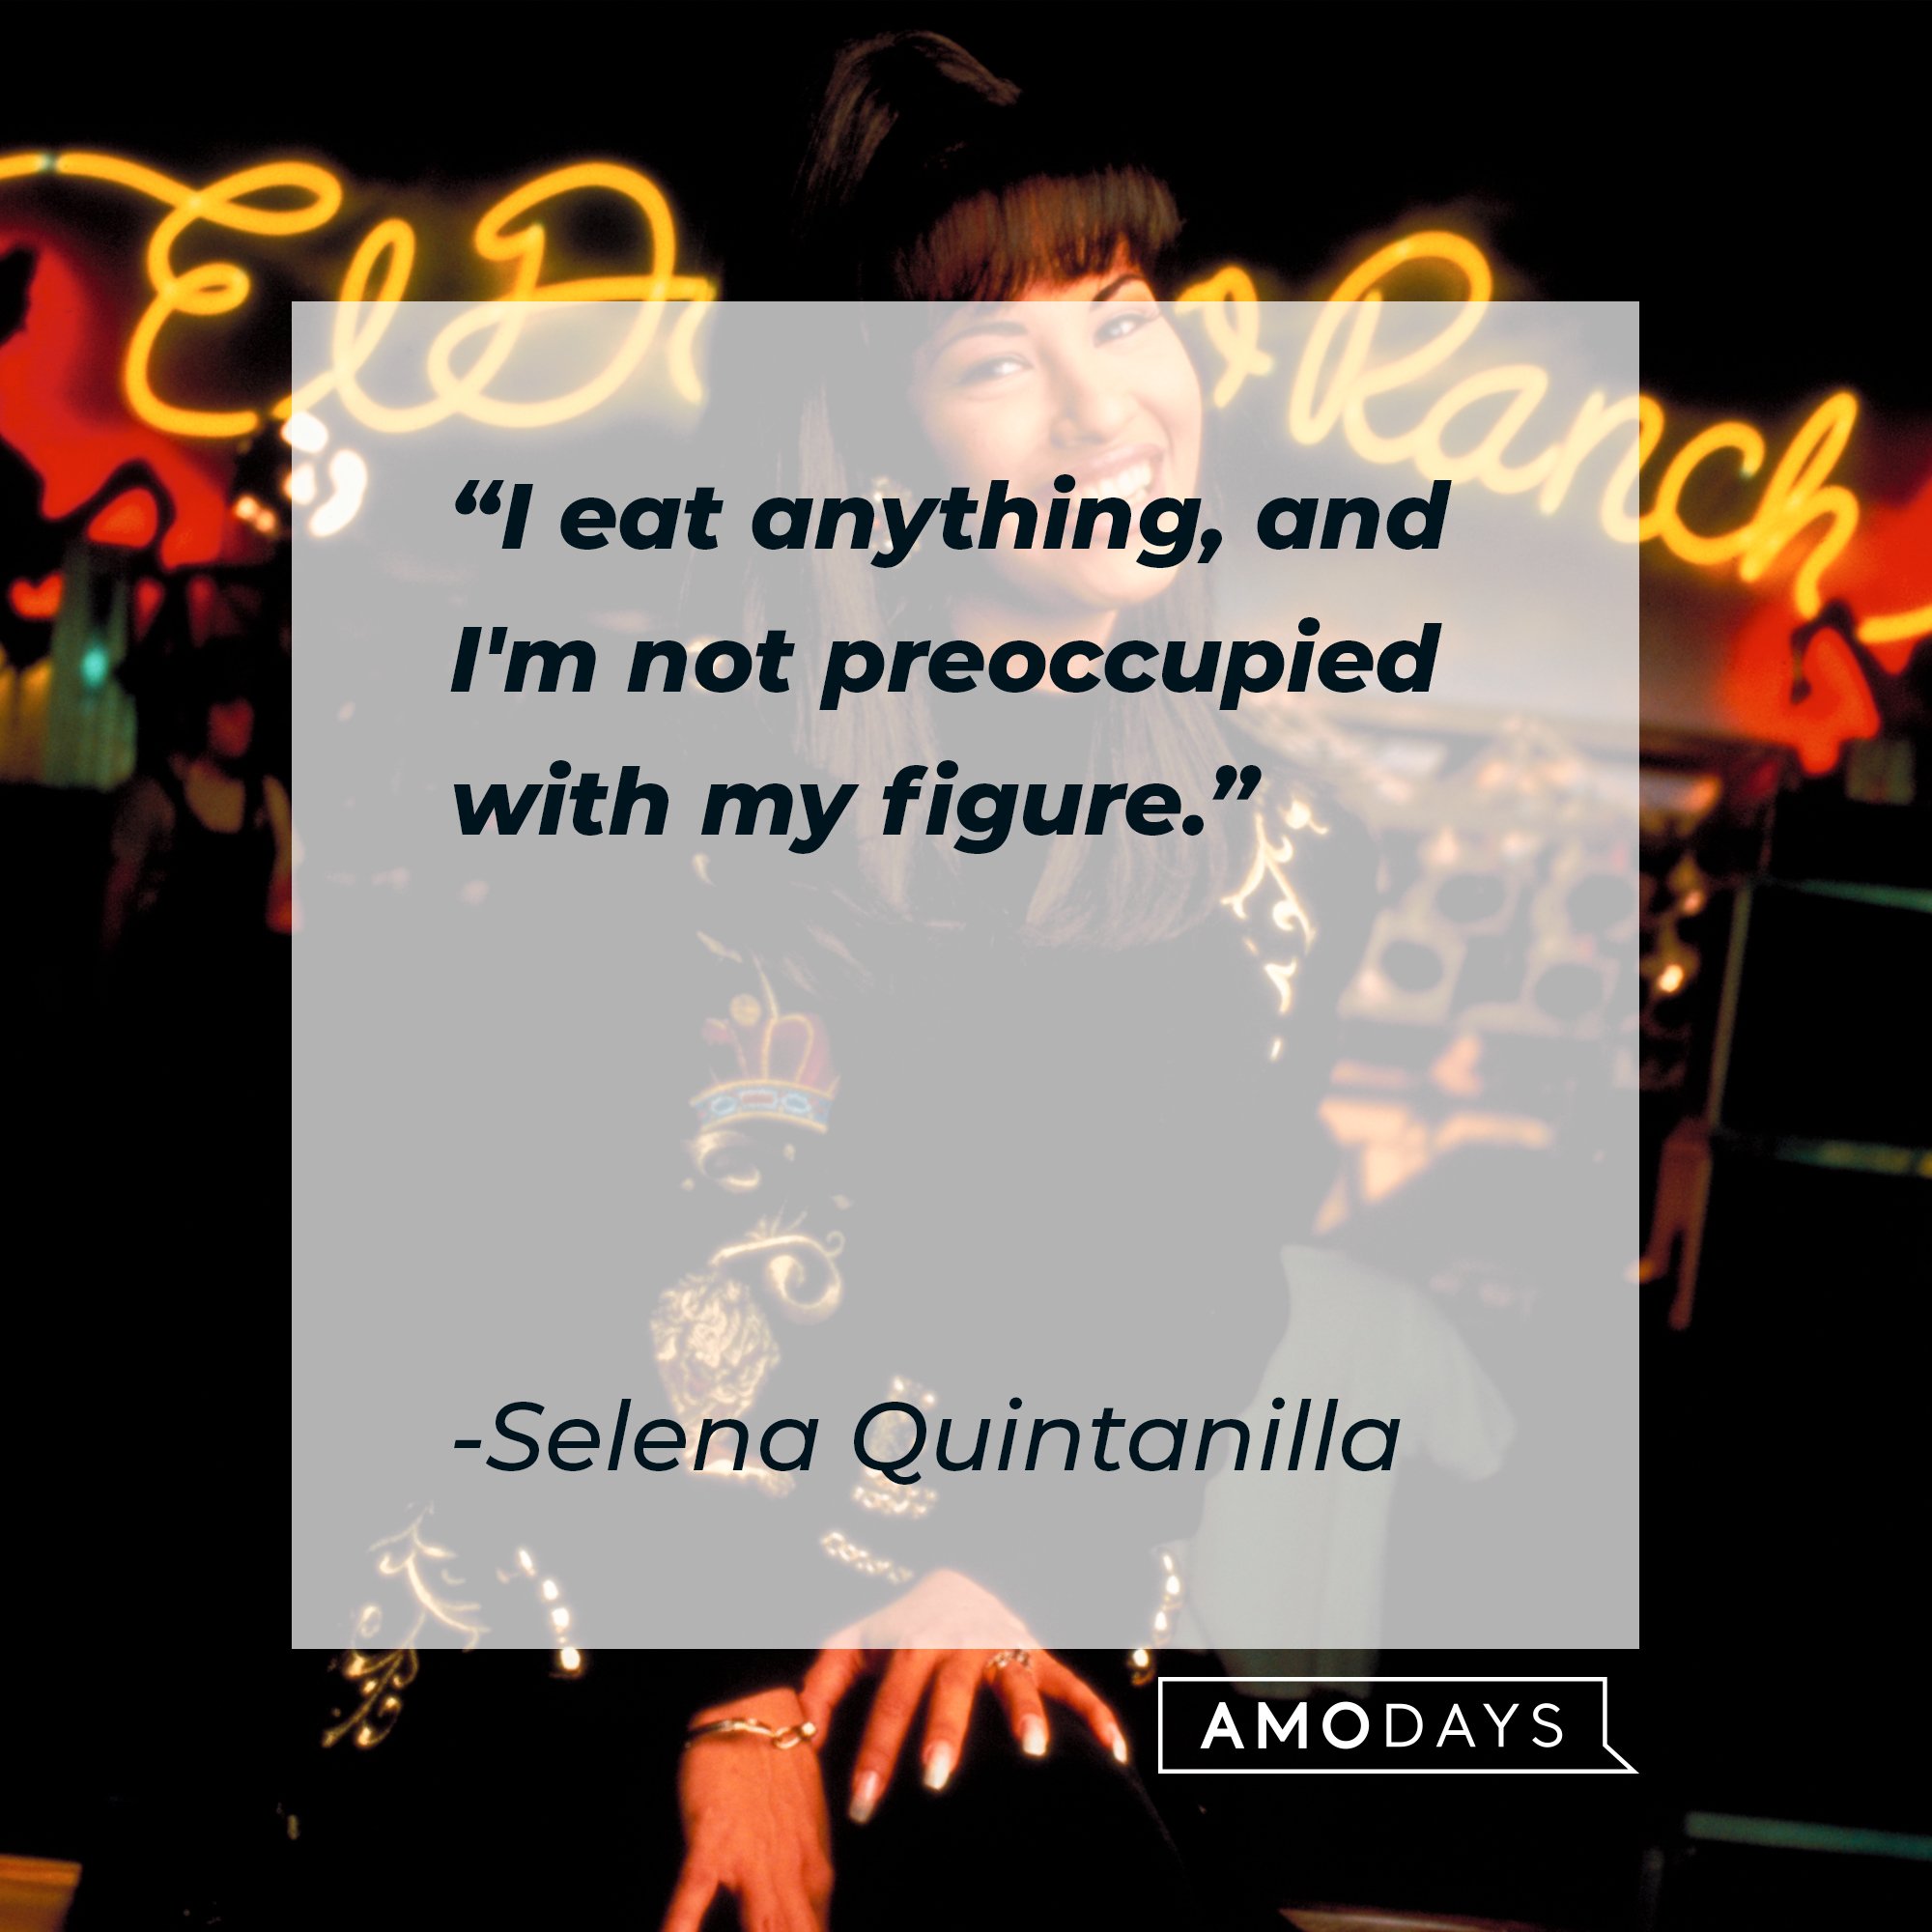 Selena Quintanilla's quote: "I eat anything, and I'm not preoccupied with my figure." | Image: AmoDays